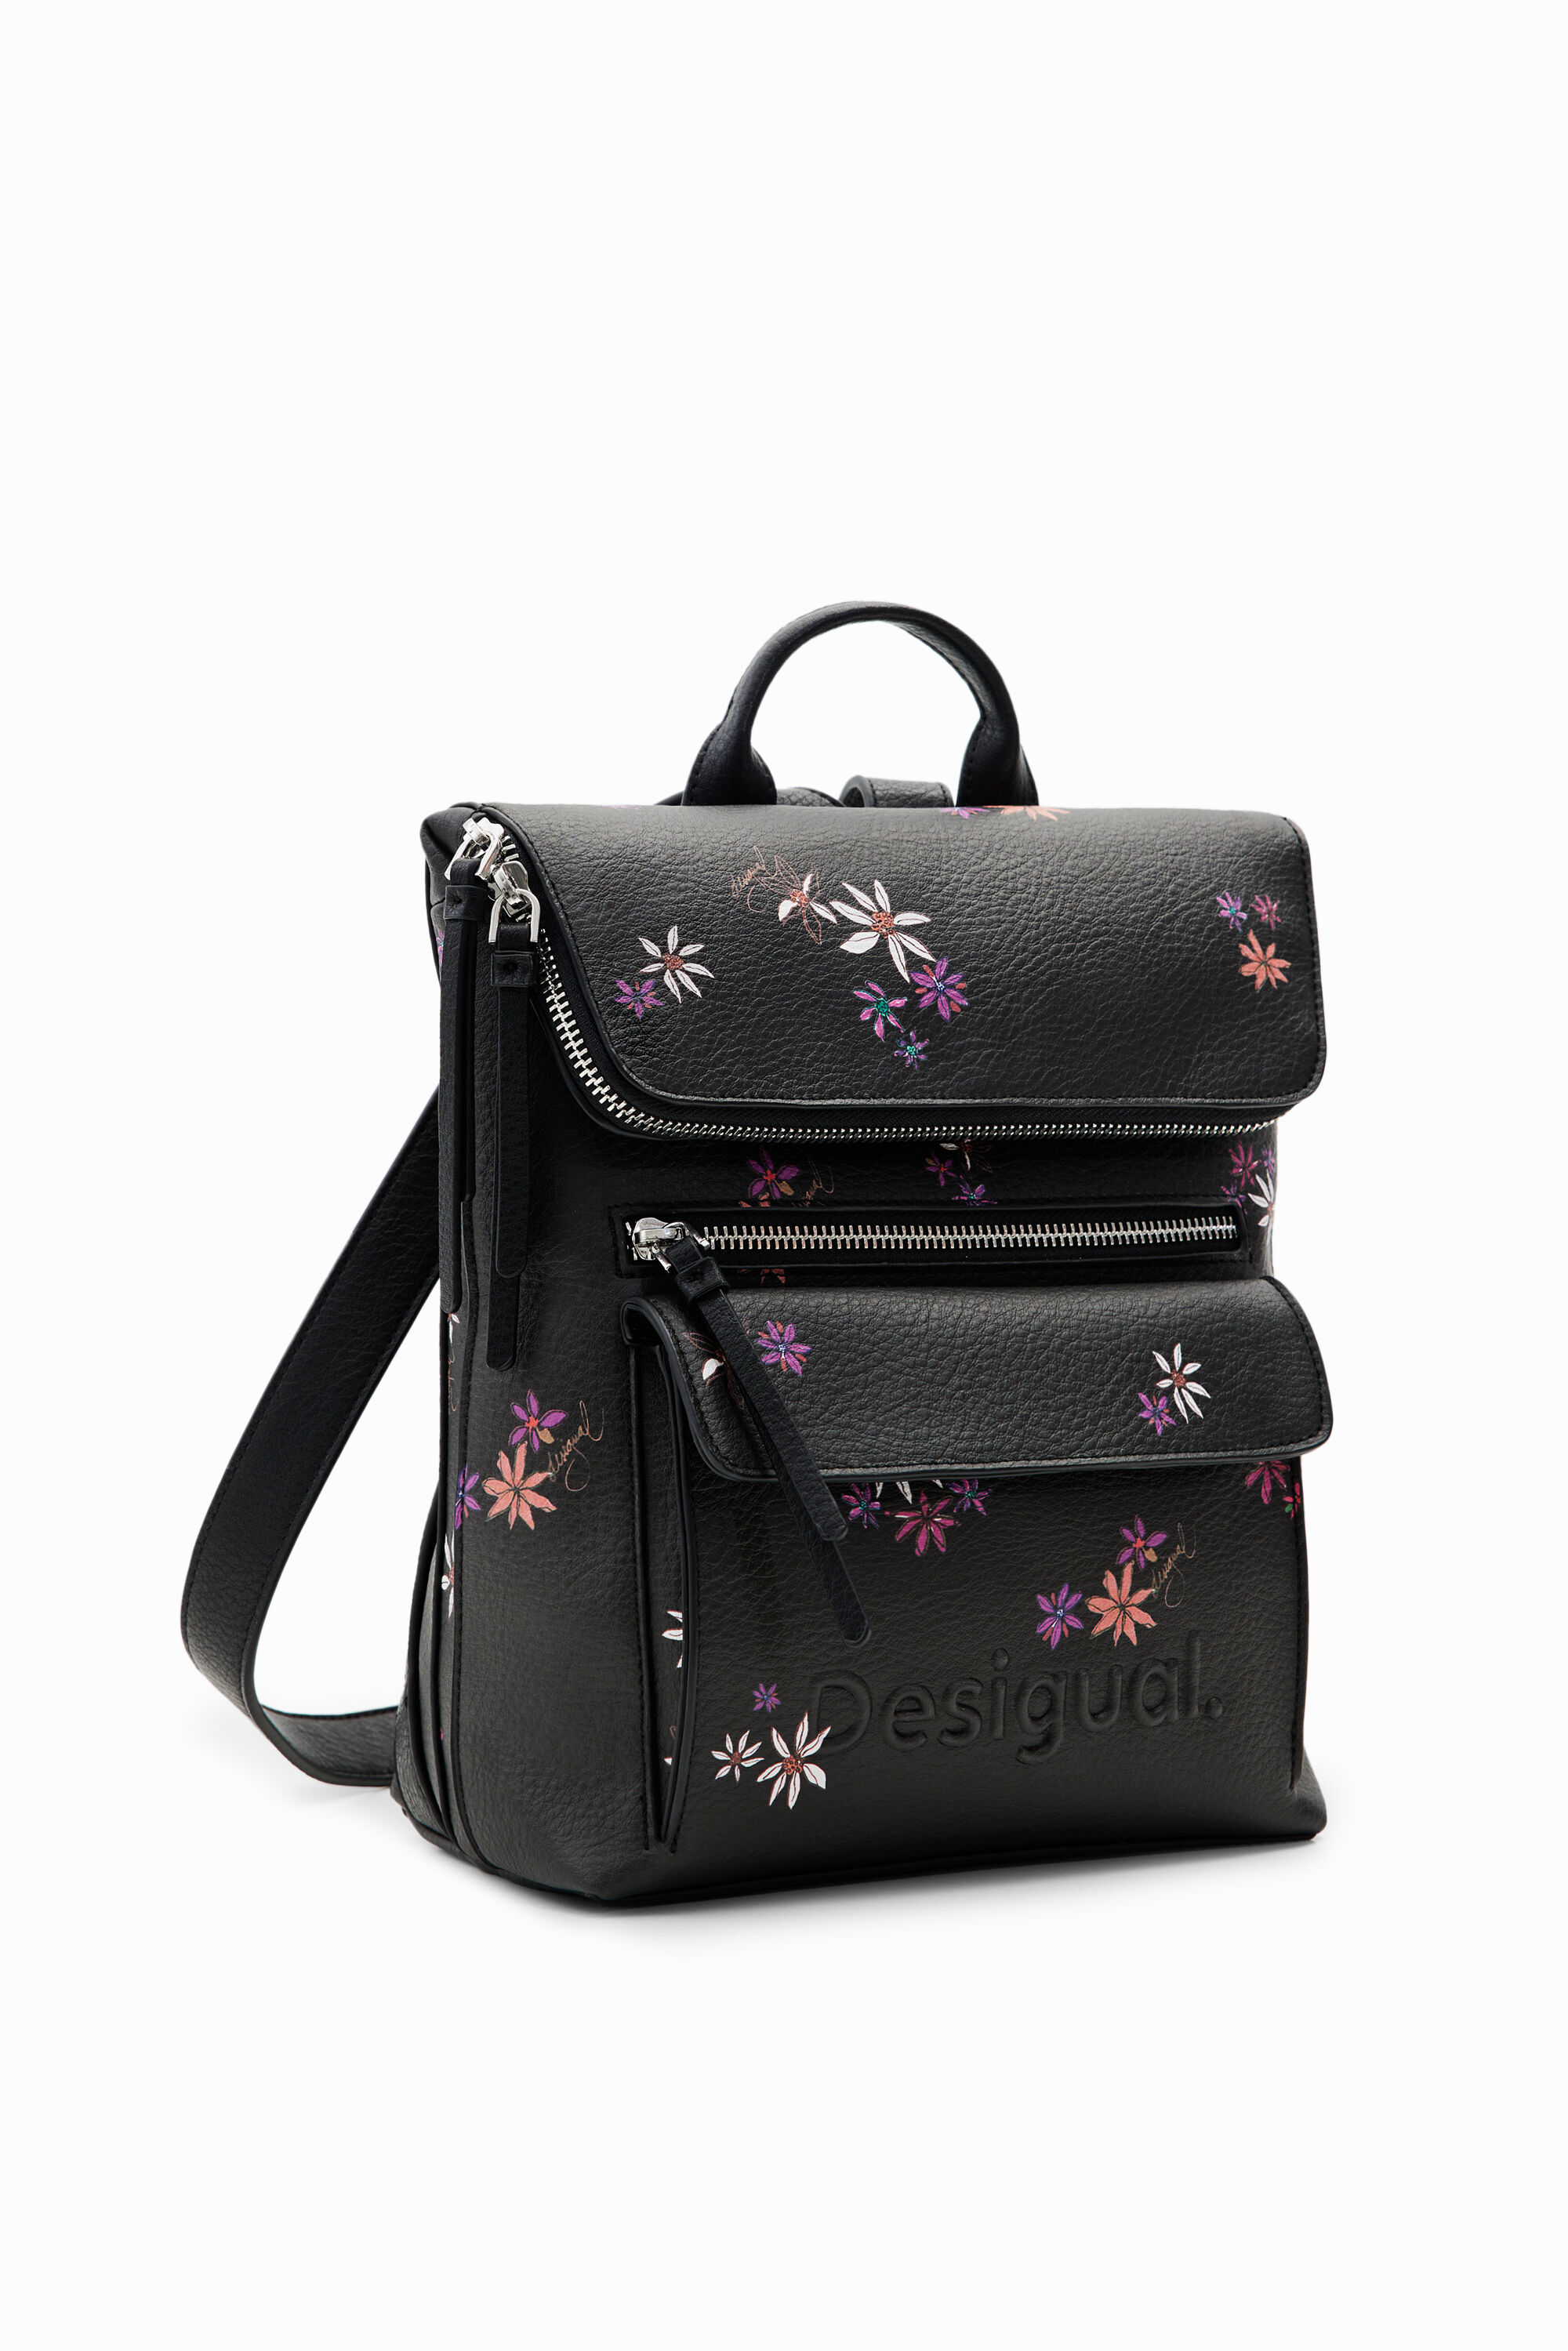 Desigual Small floral backpack